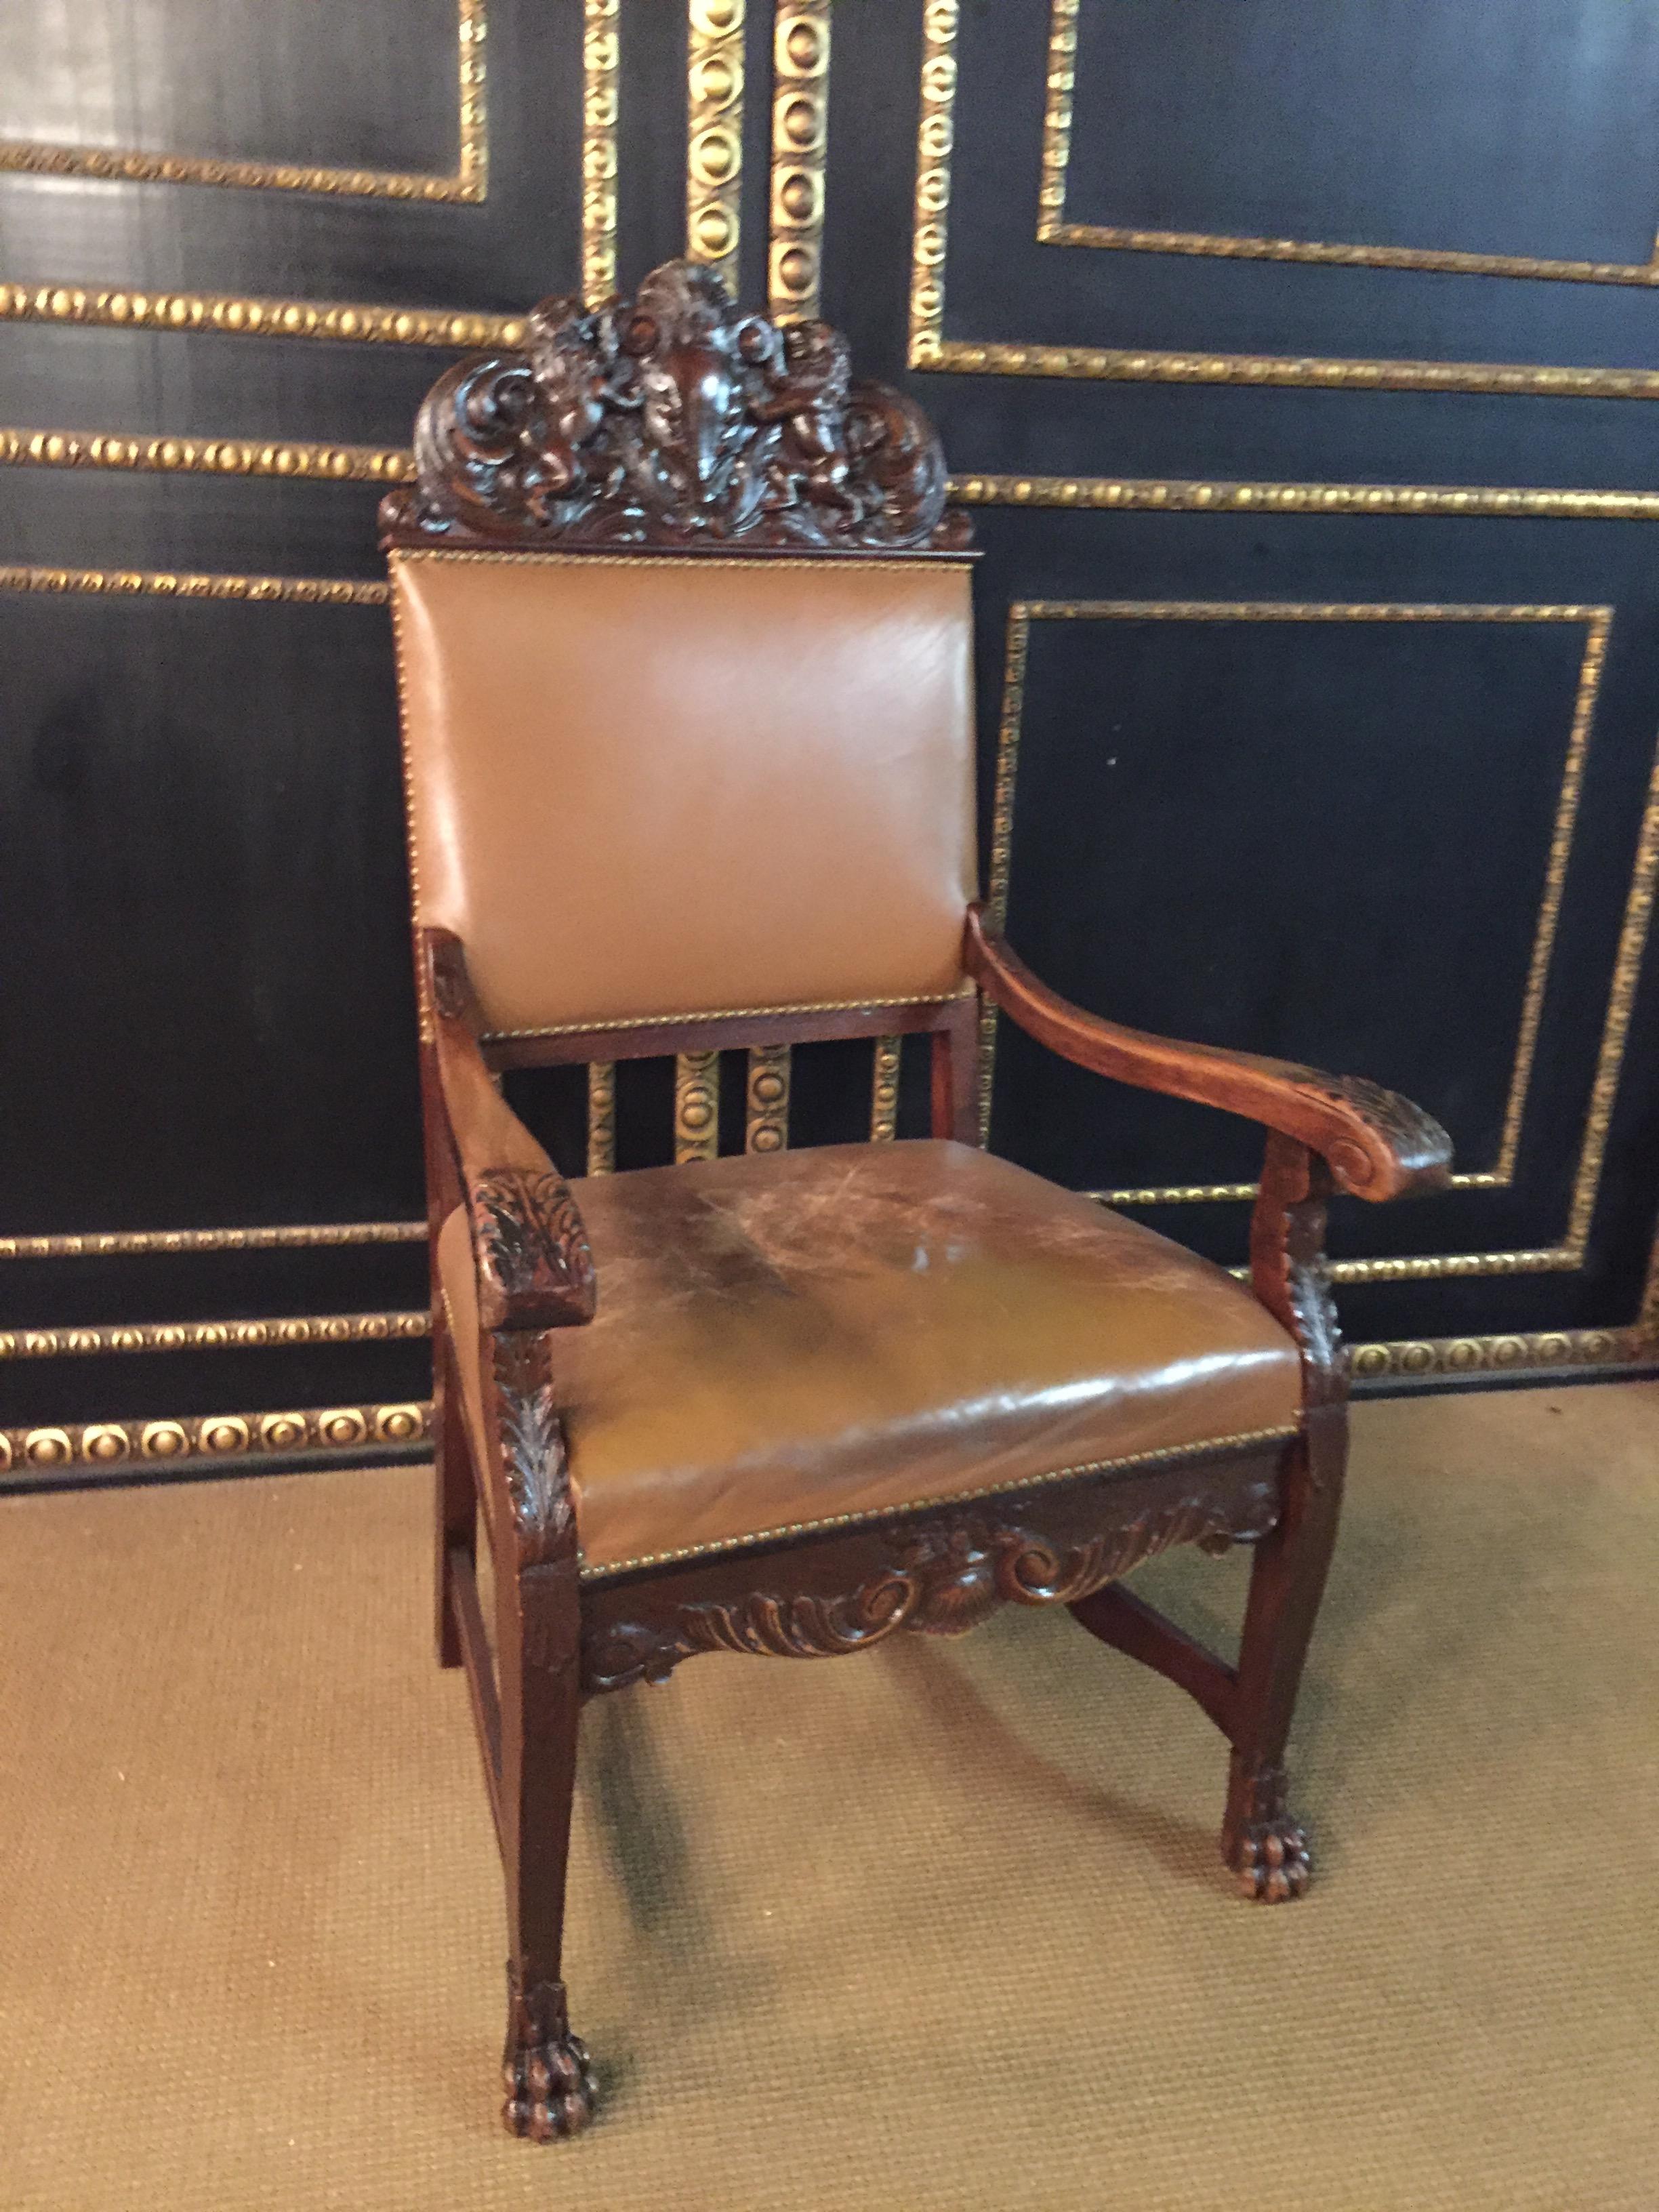 Original neo-Renaissance armchair, circa 1870-1880. Massive dark oak, feet with lion paws connected by wide bridges. Carved on both sides armrests, high backrest with plastic carvings with 2 lions. Seat and back covered with old leather.